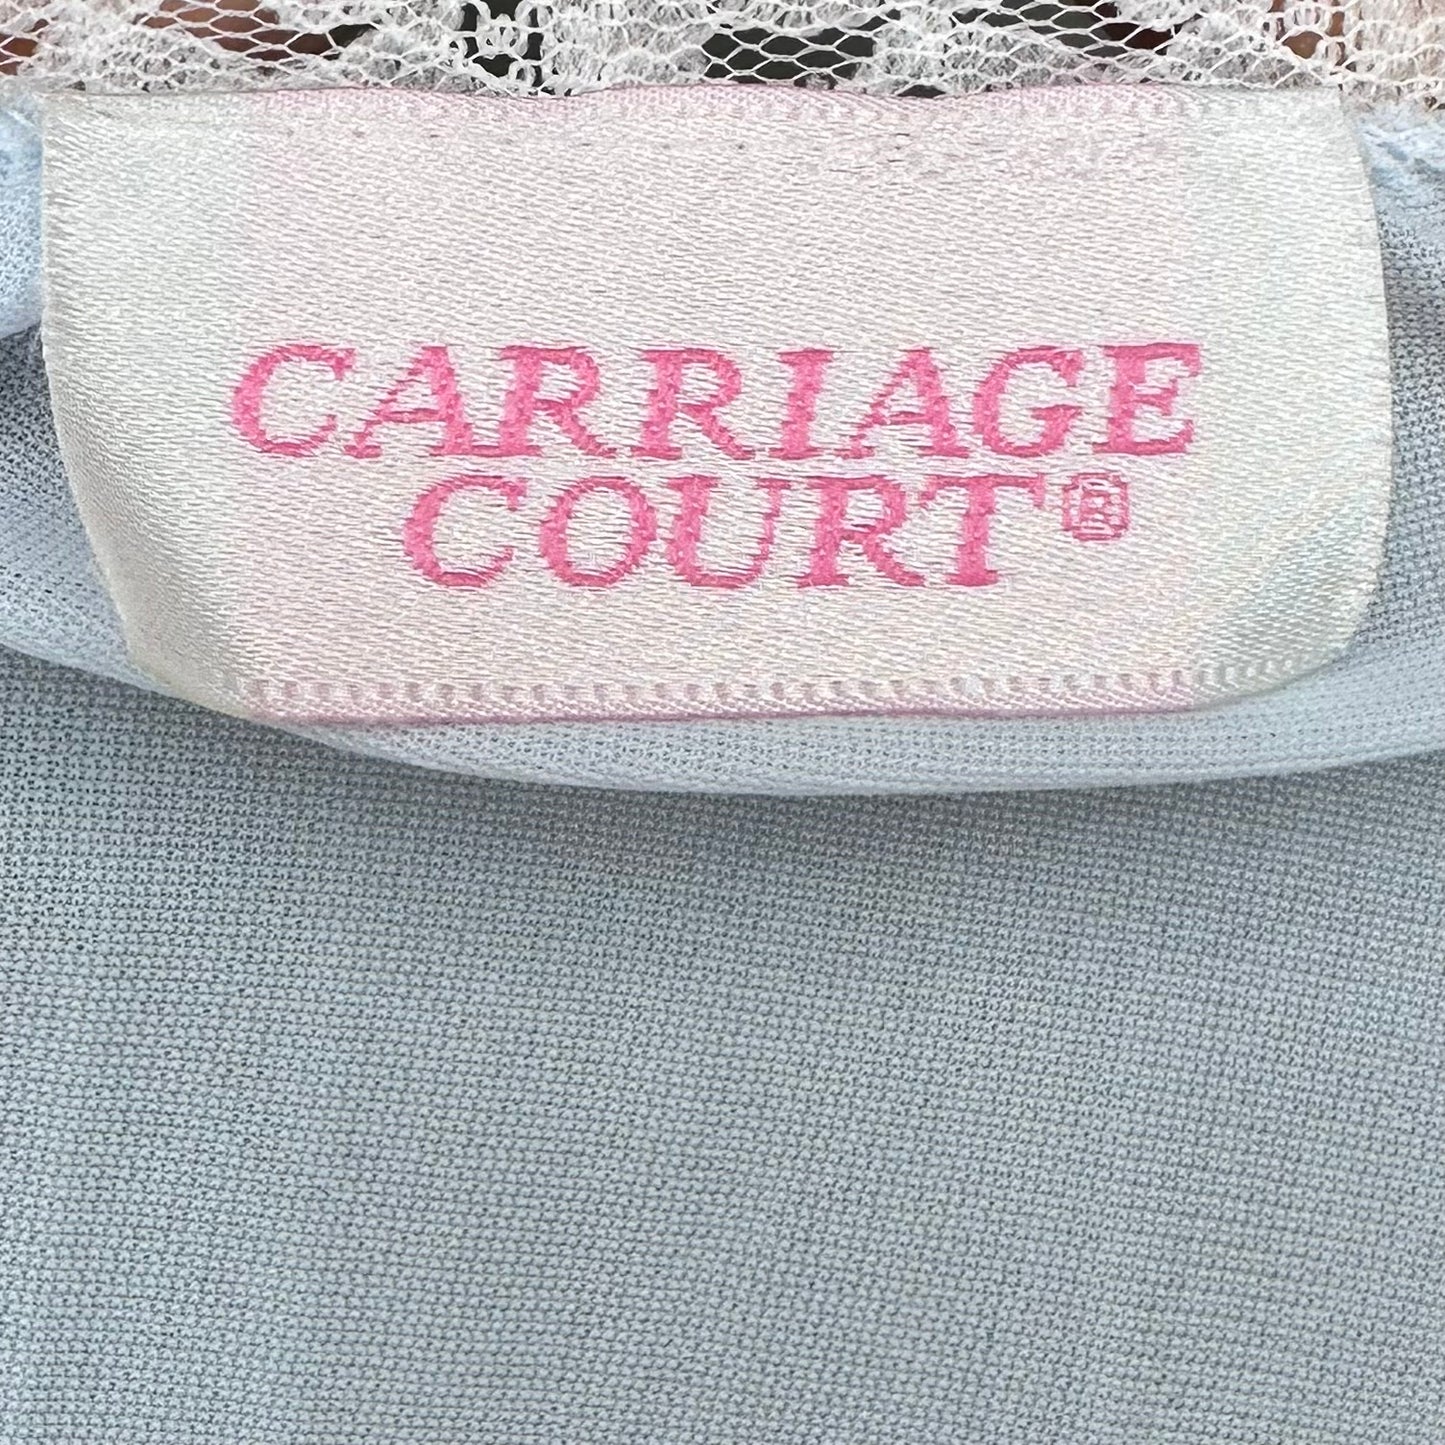 1980s/90s Pastel Blue Nightgown, Carriage Court Sears Size L/XL, Deadstock with tags